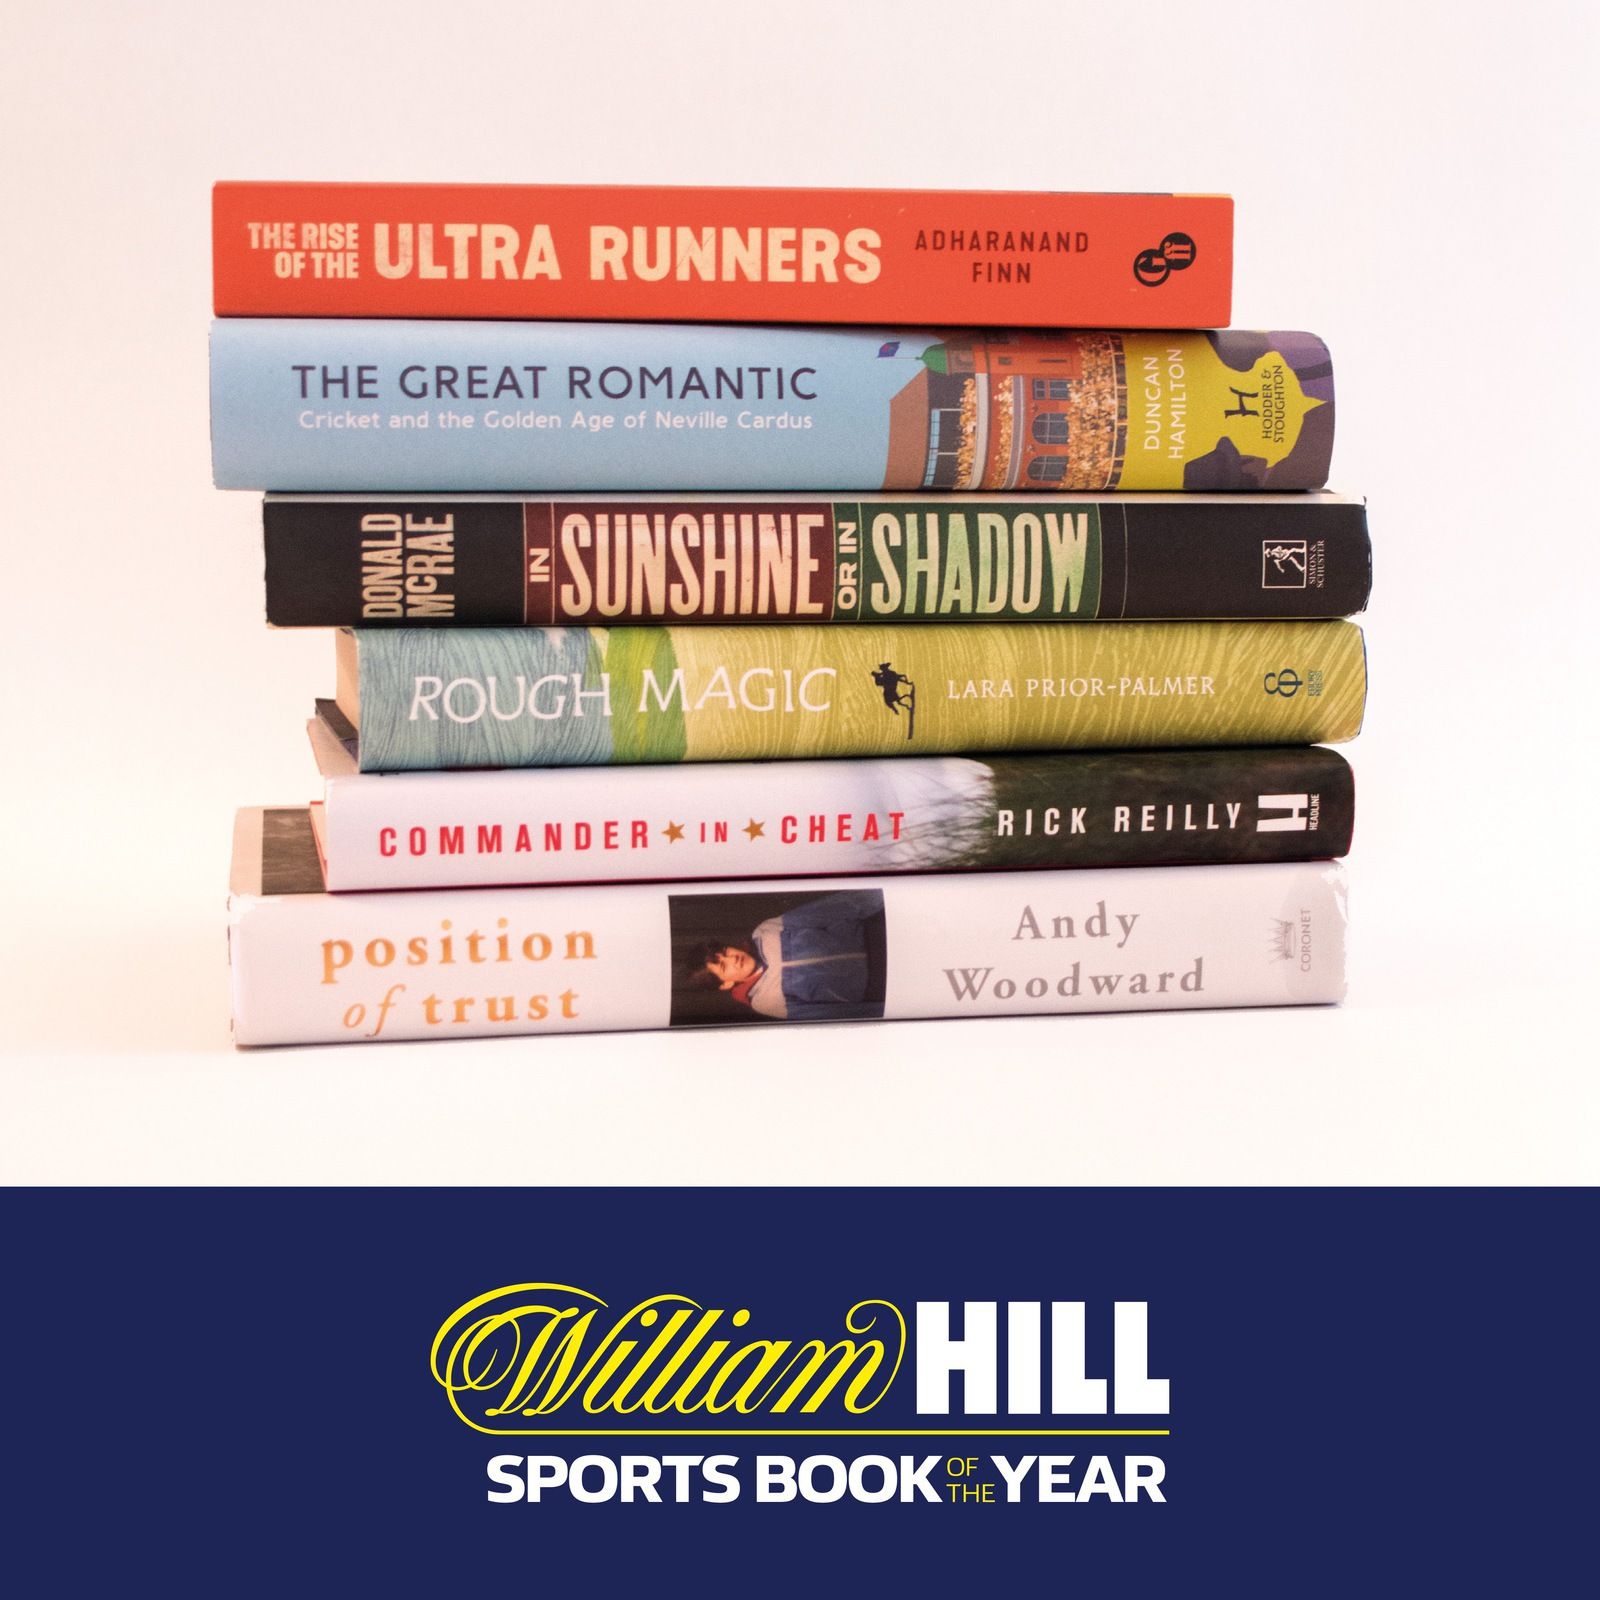 The William Hill Sports Book of the Year Podcast / Lara Prior-Palmer's 'Rough  Magic' and Graham Sharpe on 'The Miracle of Castel di Sangro'